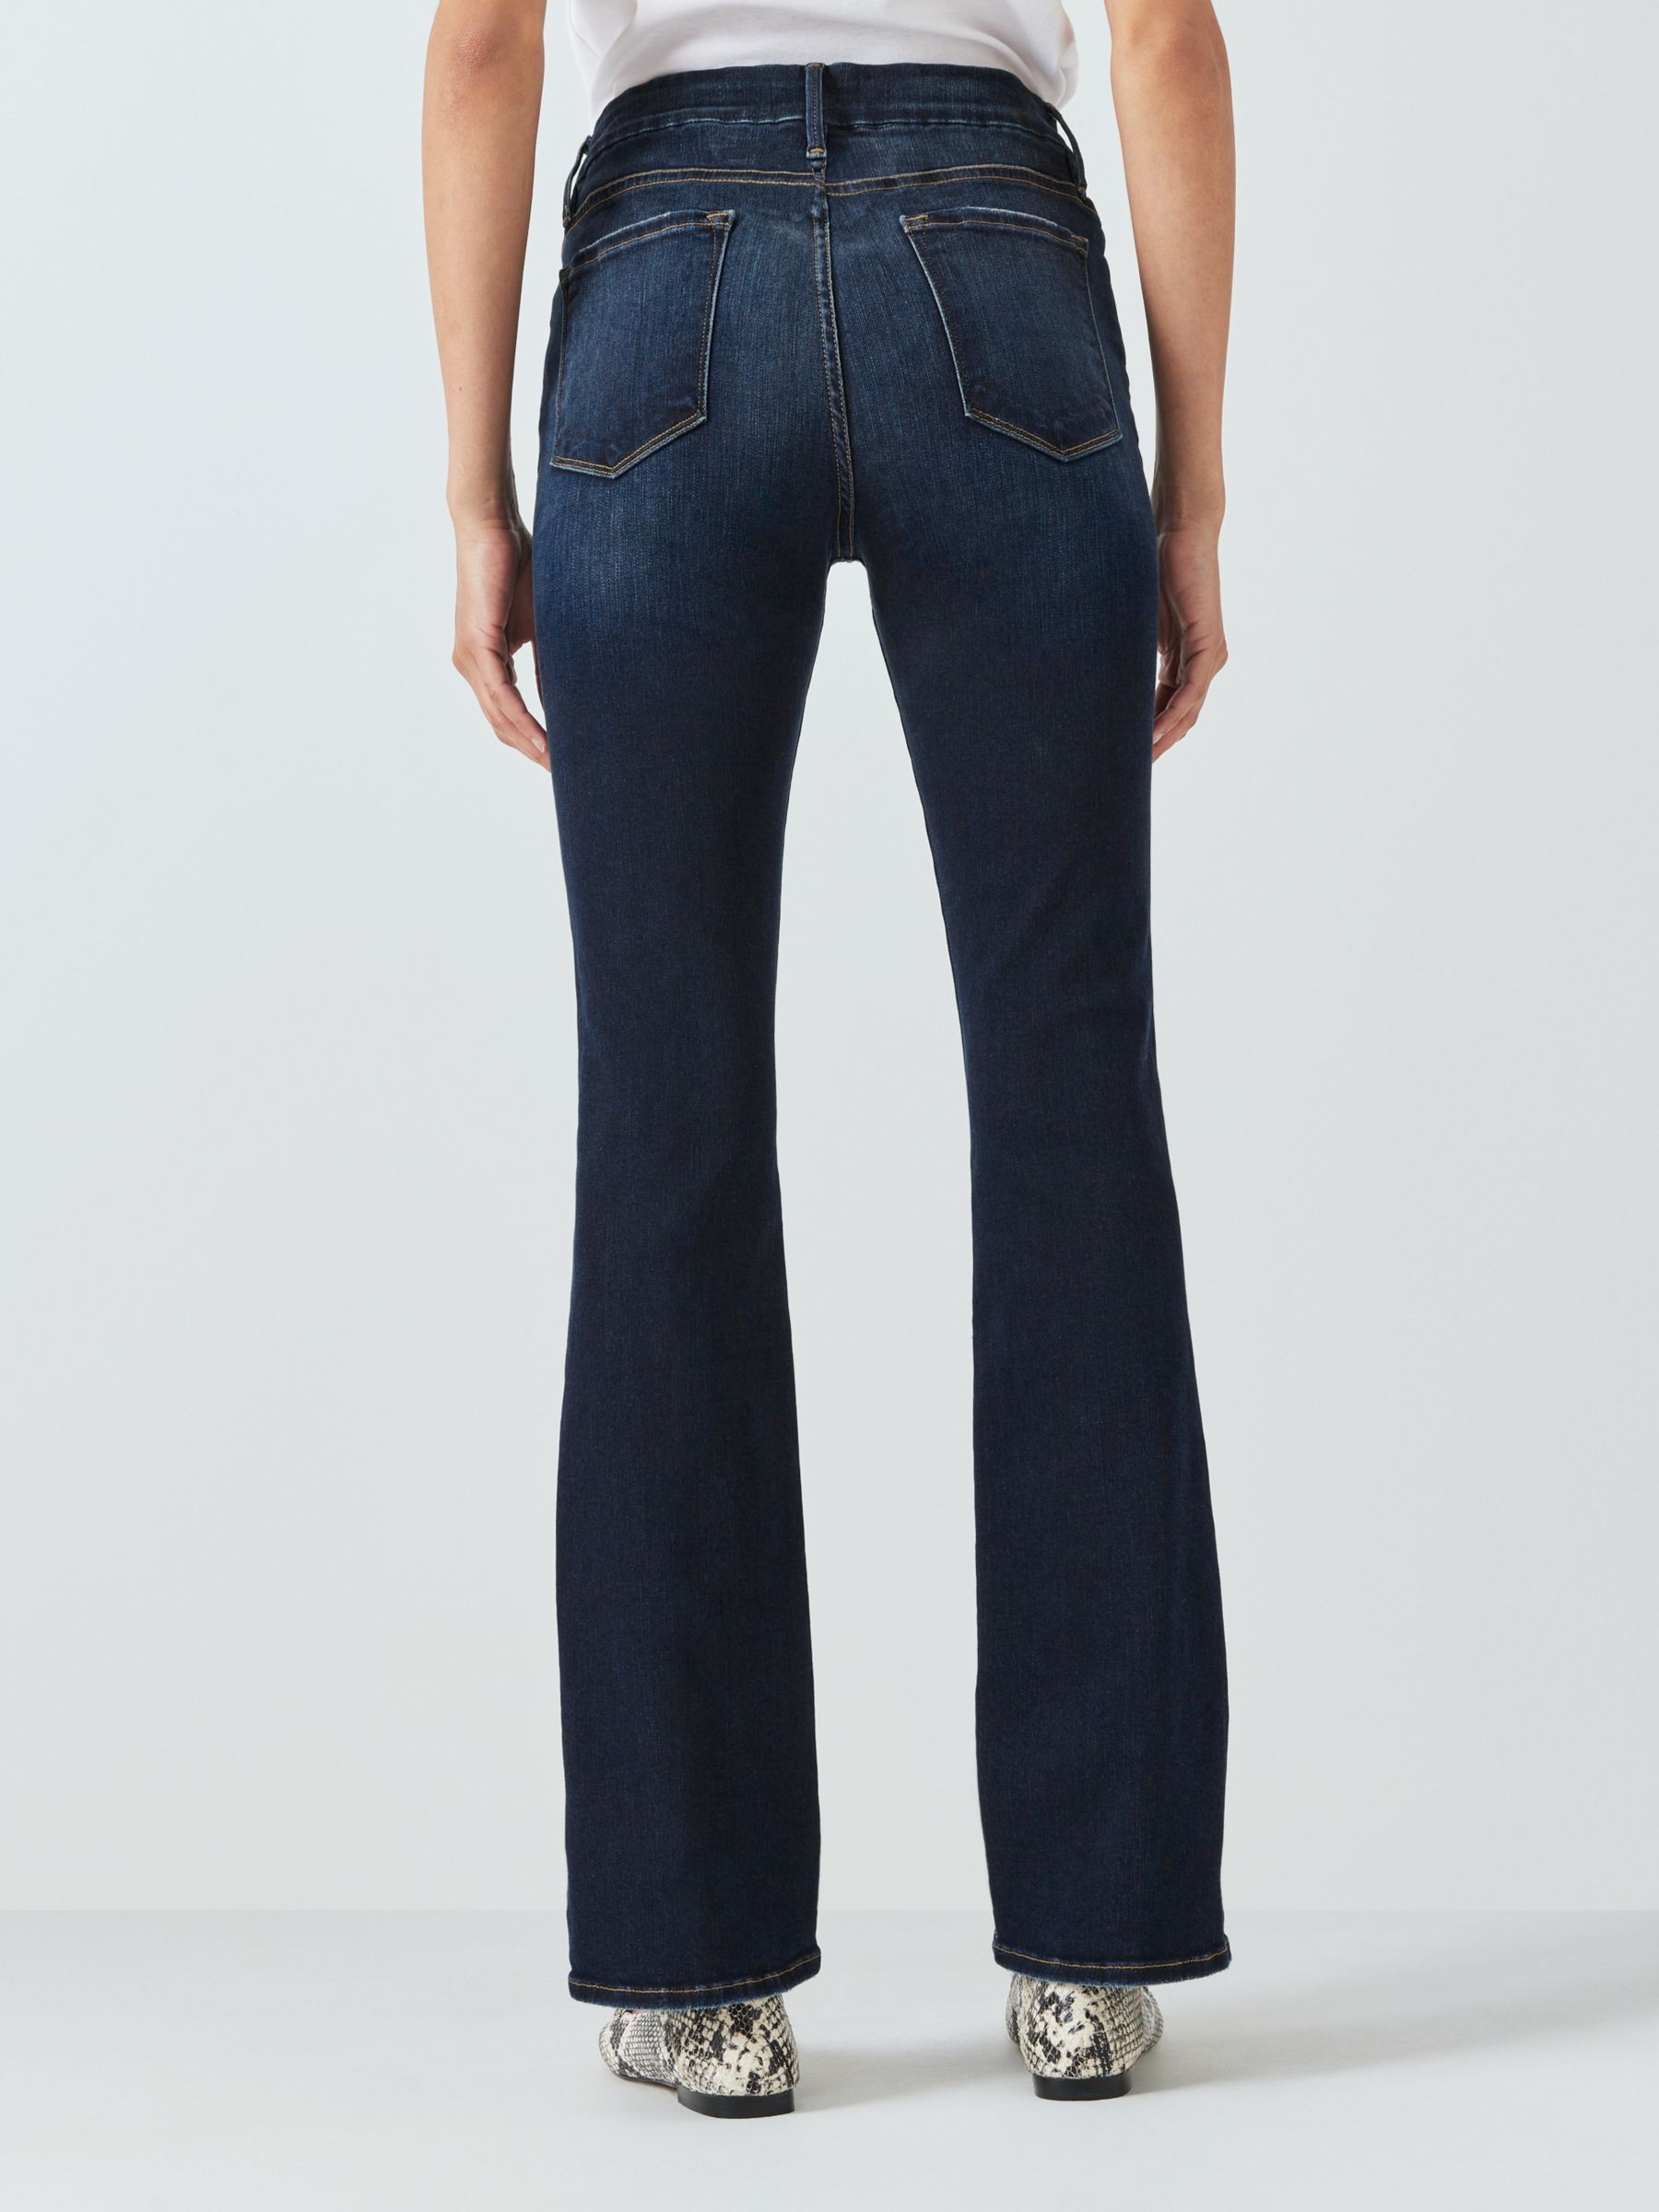 Buy FRAME Le Mini Bootcut Jeans, Navy Online at johnlewis.com